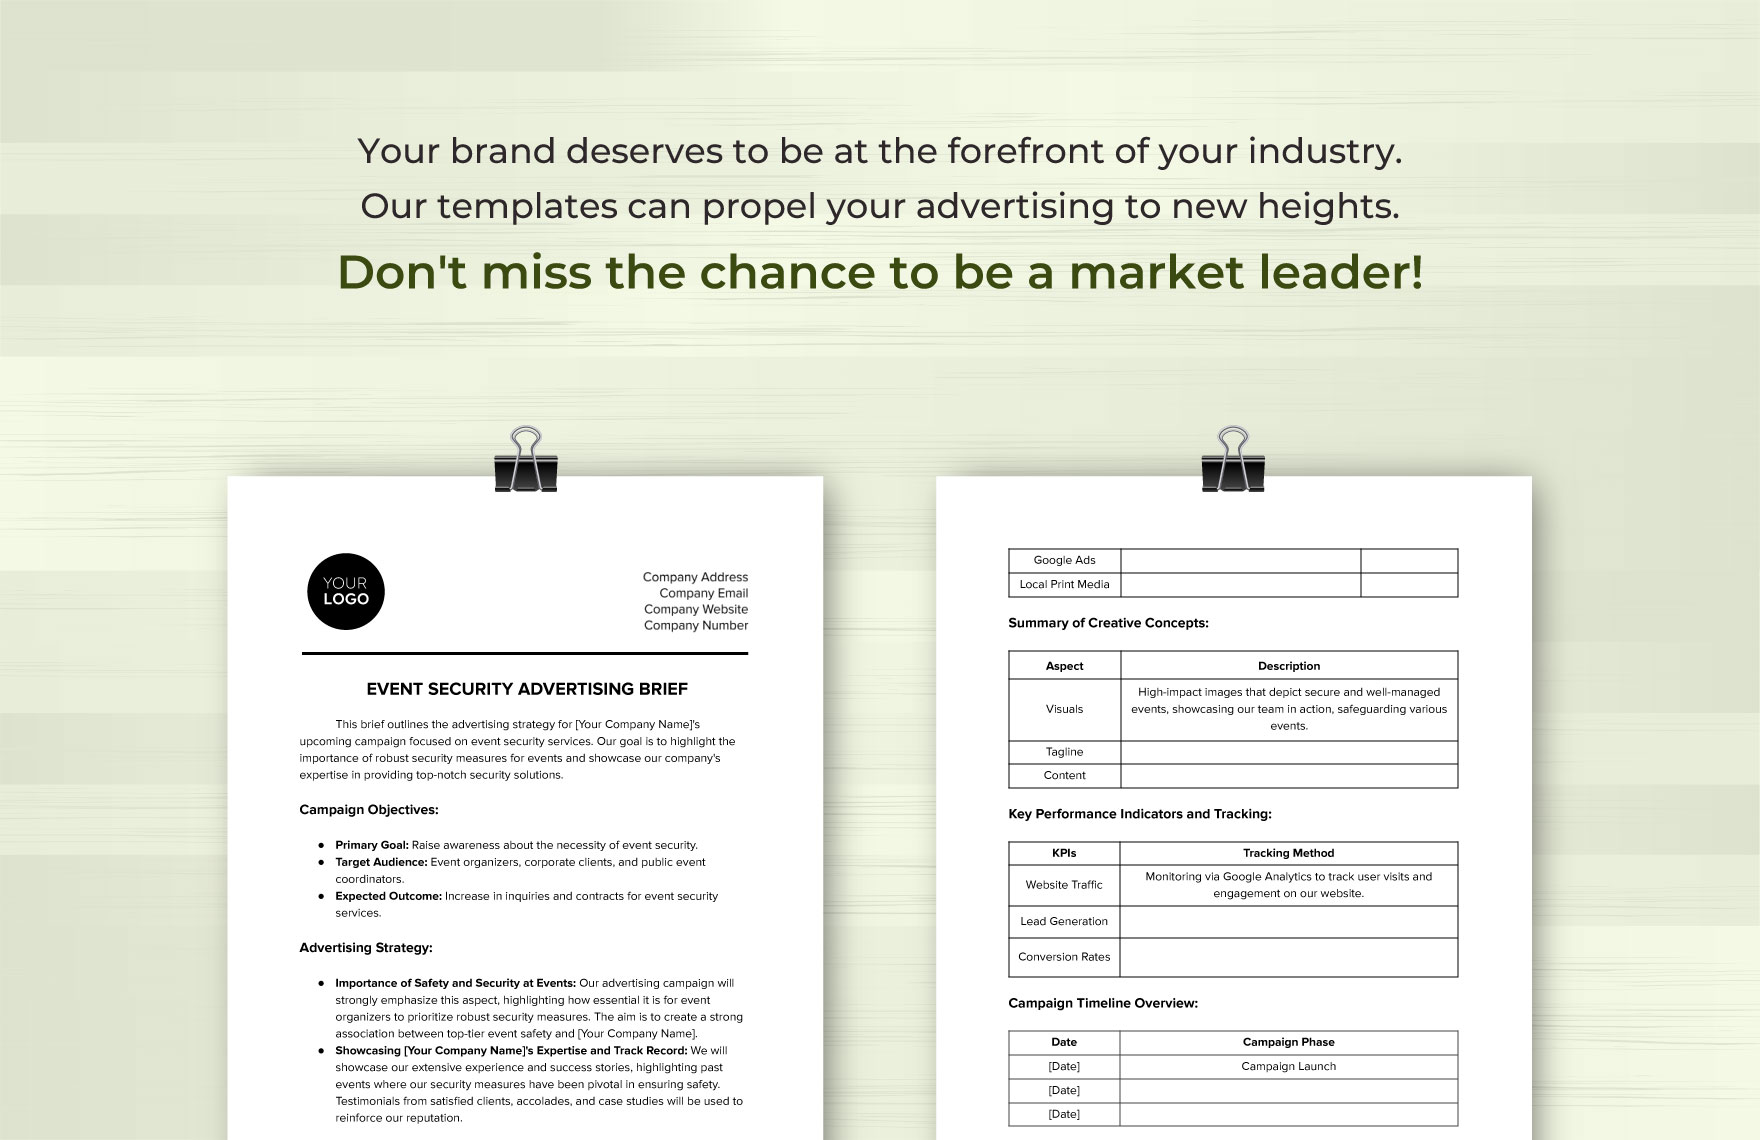 Event Security Advertising Brief Template